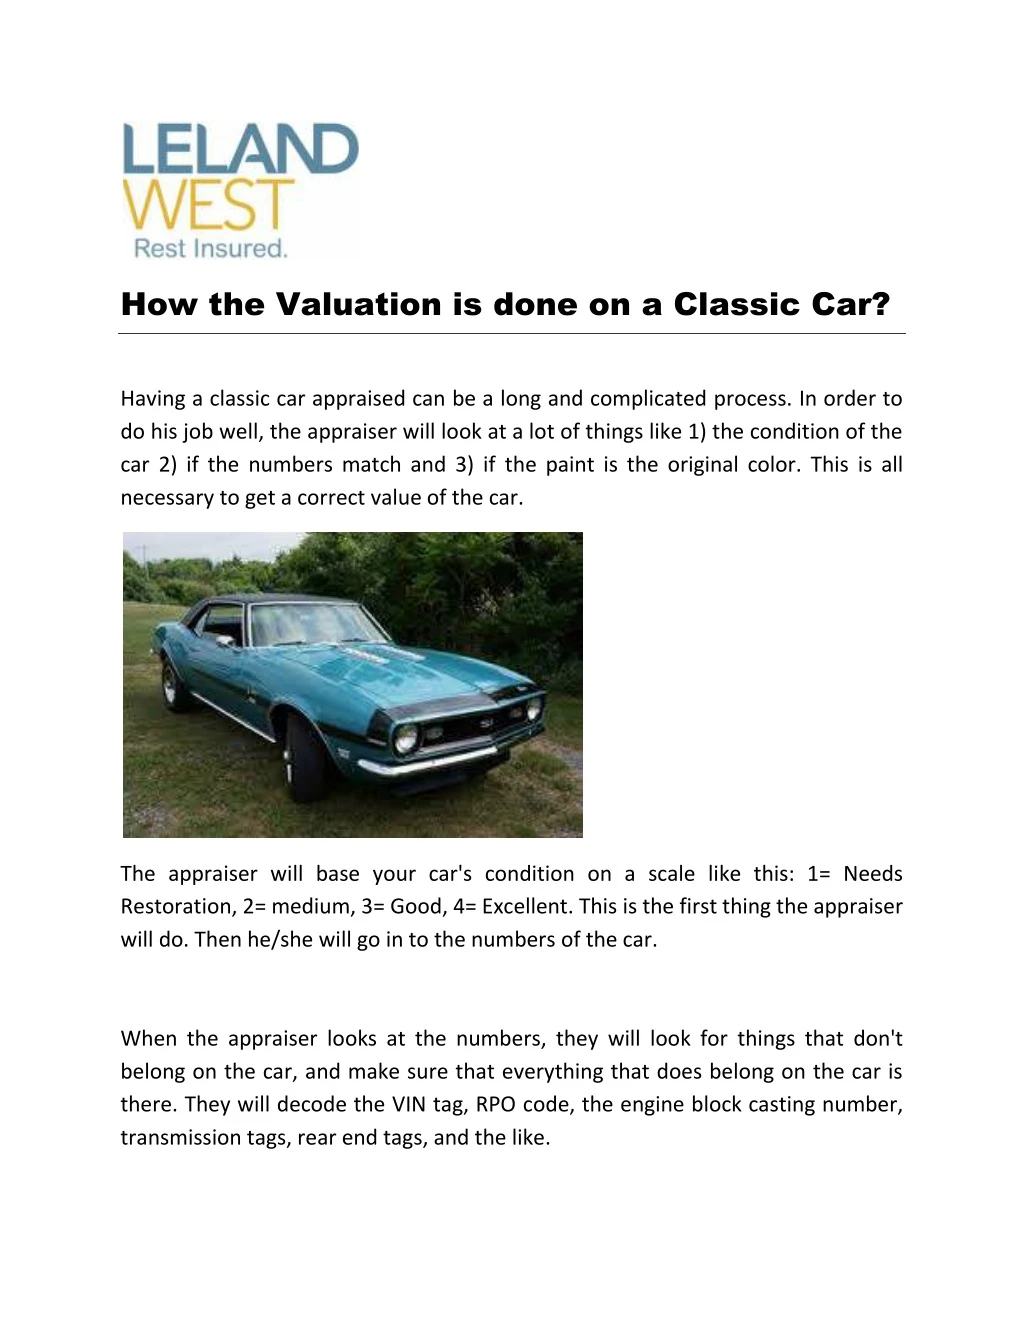 how the valuation is done on a classic car